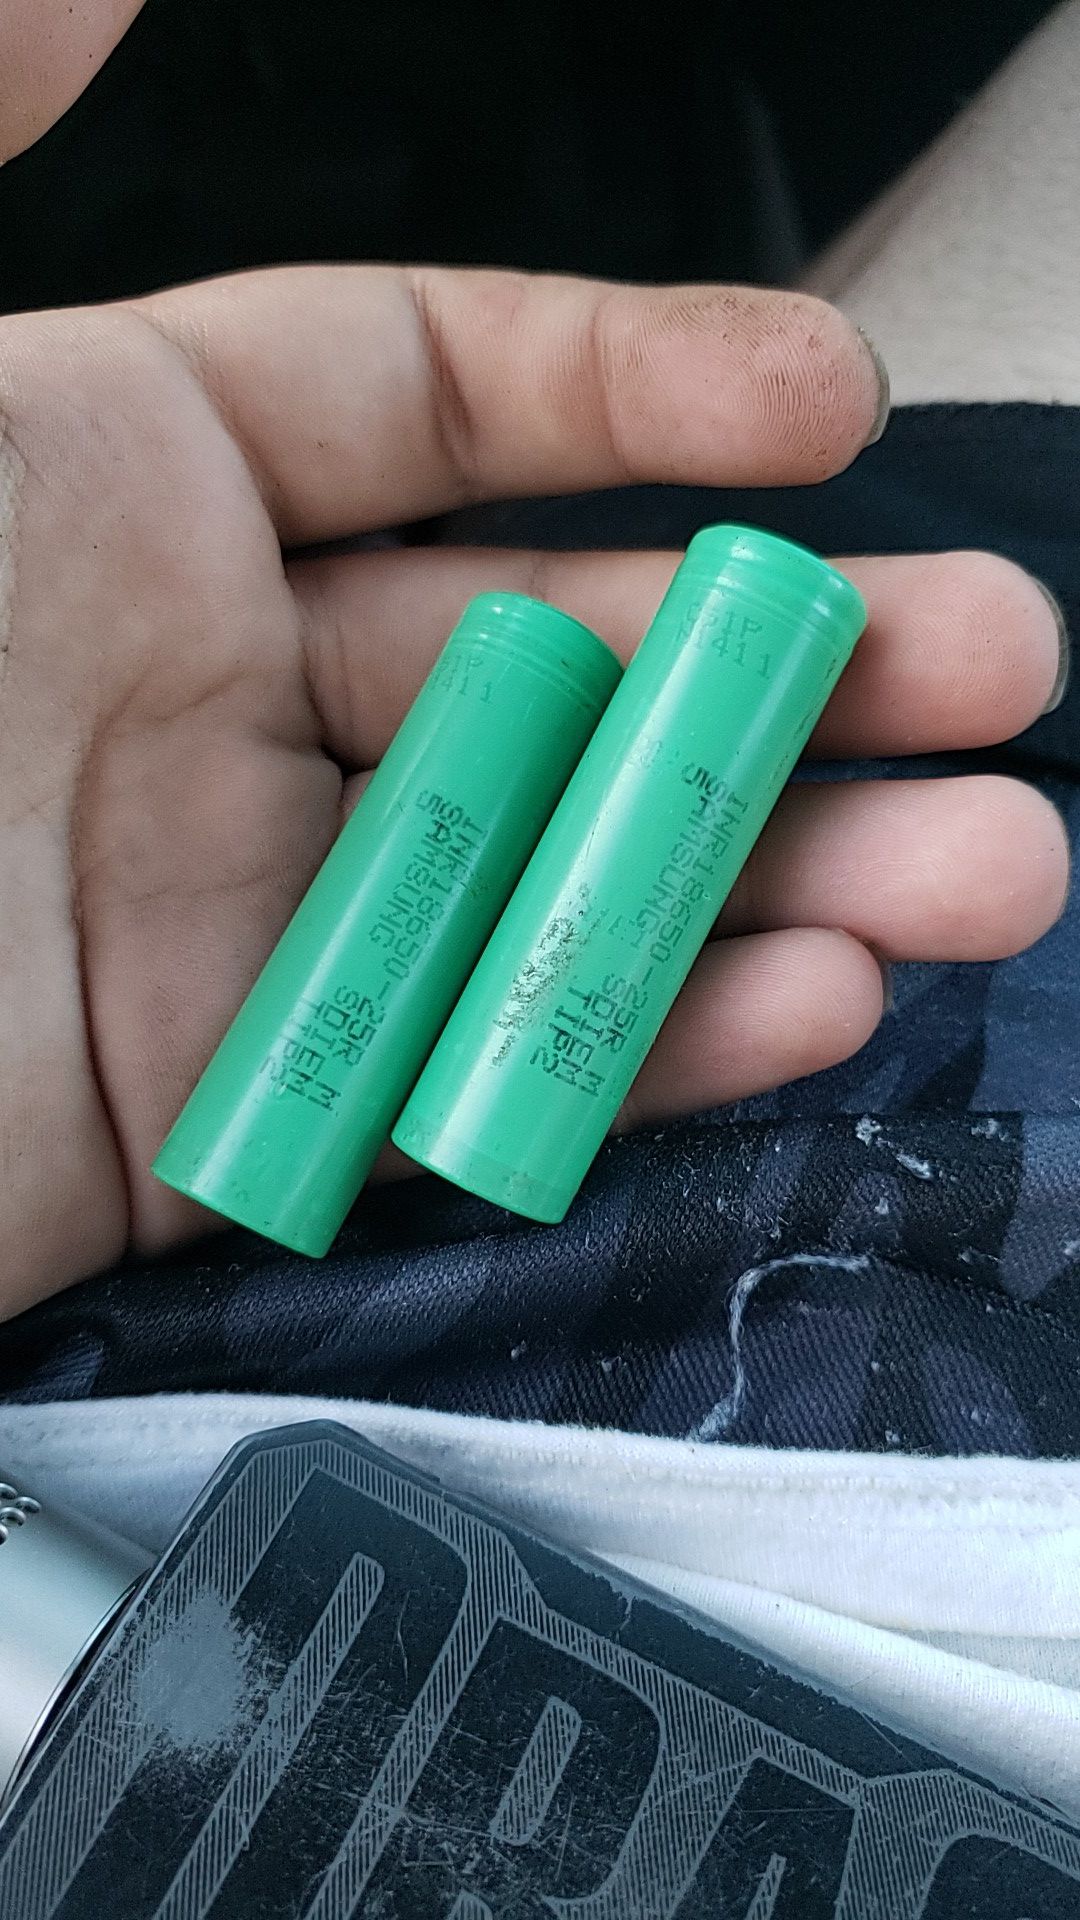 Batteries got new ones don't need extras